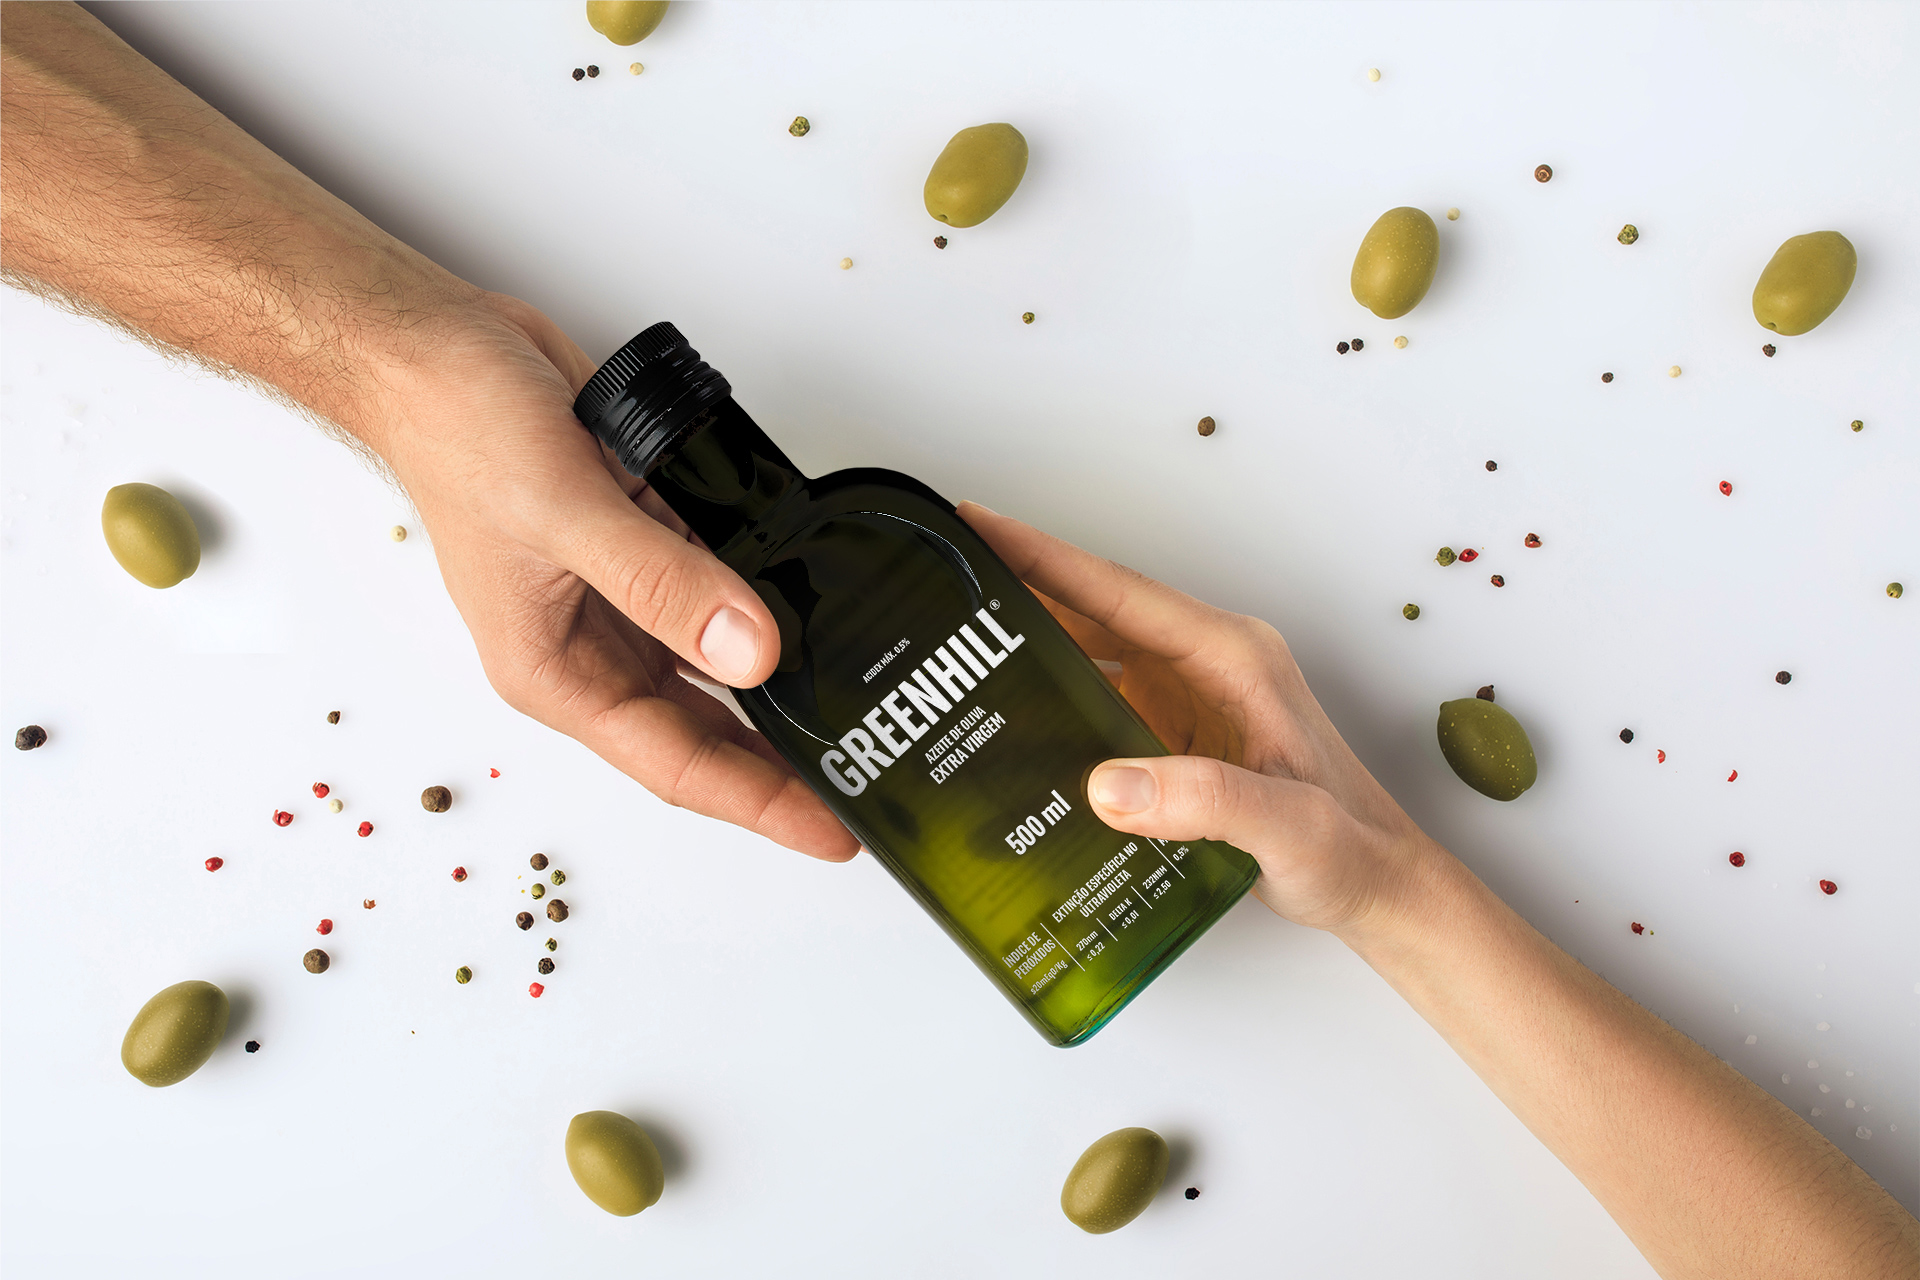 Greenhill Olive Oil Packaging Design